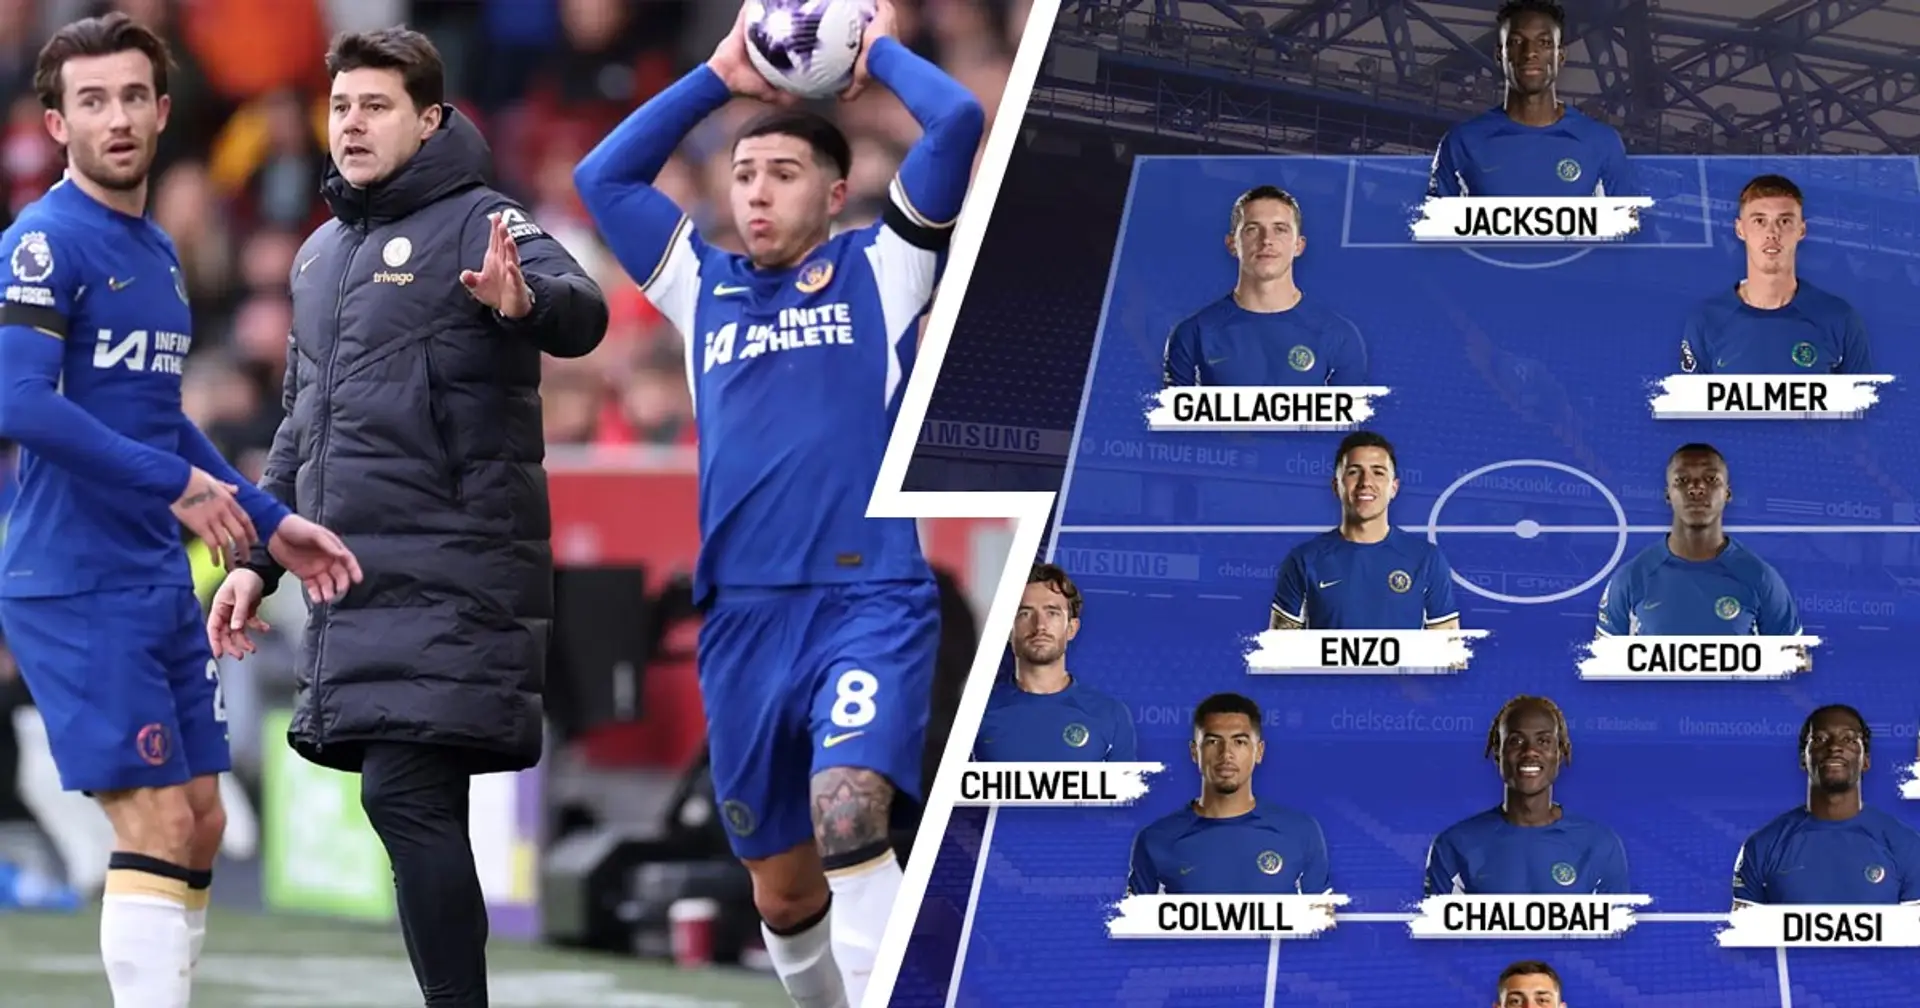 Chelsea's biggest weaknesses in Brentford draw shown in lineup - features two players